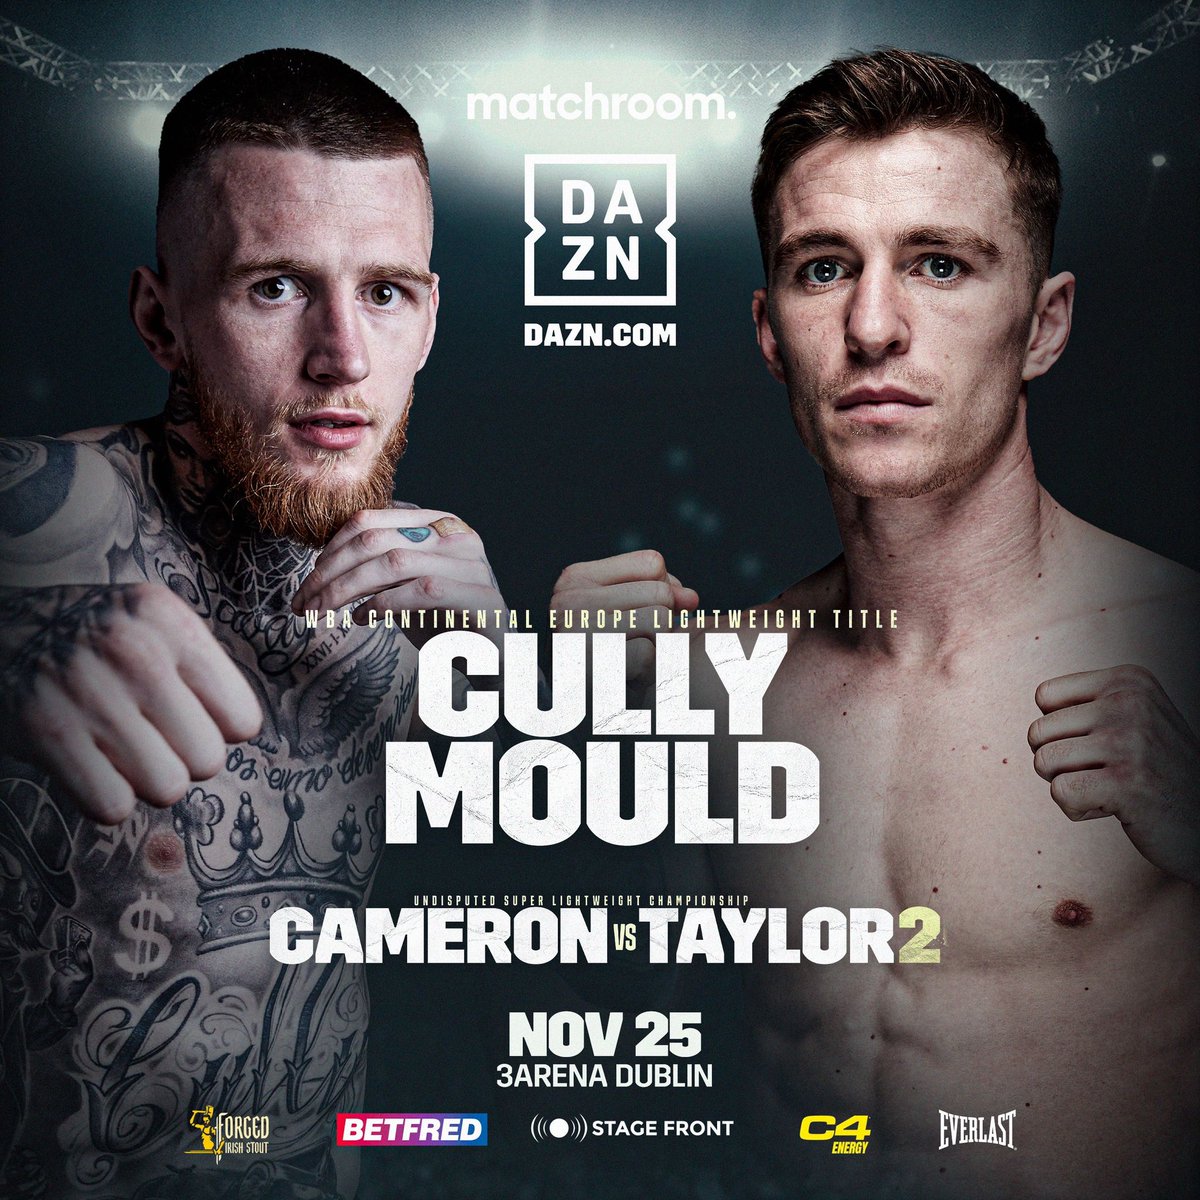 Gary Cully vs Reece Mould for the WBA Continental Europe Lightweight title added to the #CameronTaylor2 card,looking forward to this one as I was at GBM Sports show in Sheffield and Reece Mould's fight against Martin McDonagh was postponed on the day of the fight 🥊
#CullyMould…